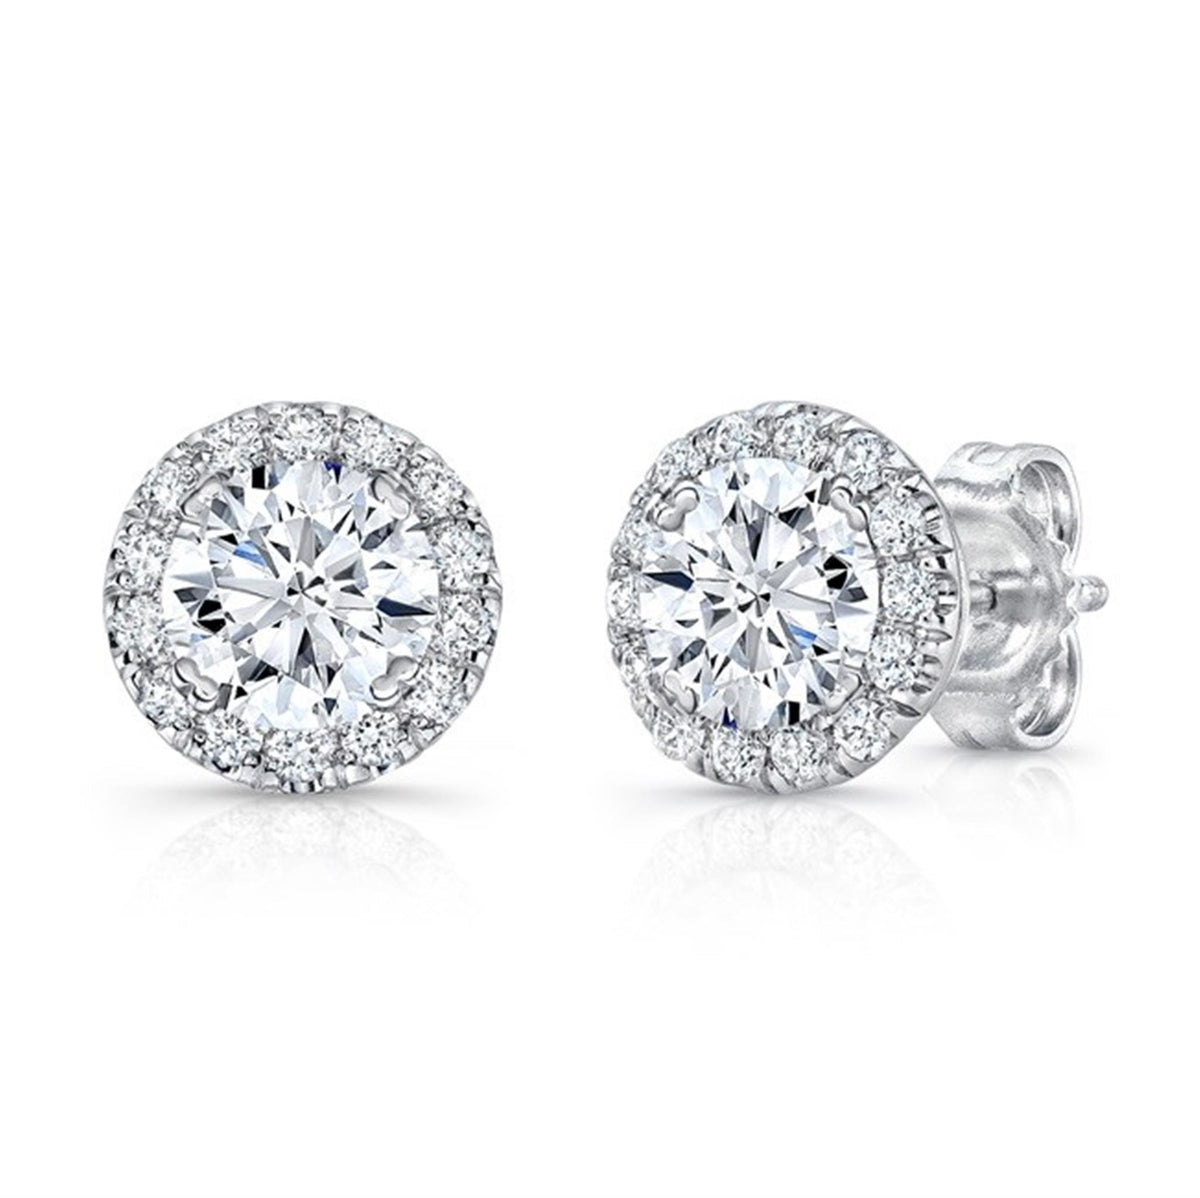 18Kt White Gold Halo Earrings 2.01cttw Natural Diamonds